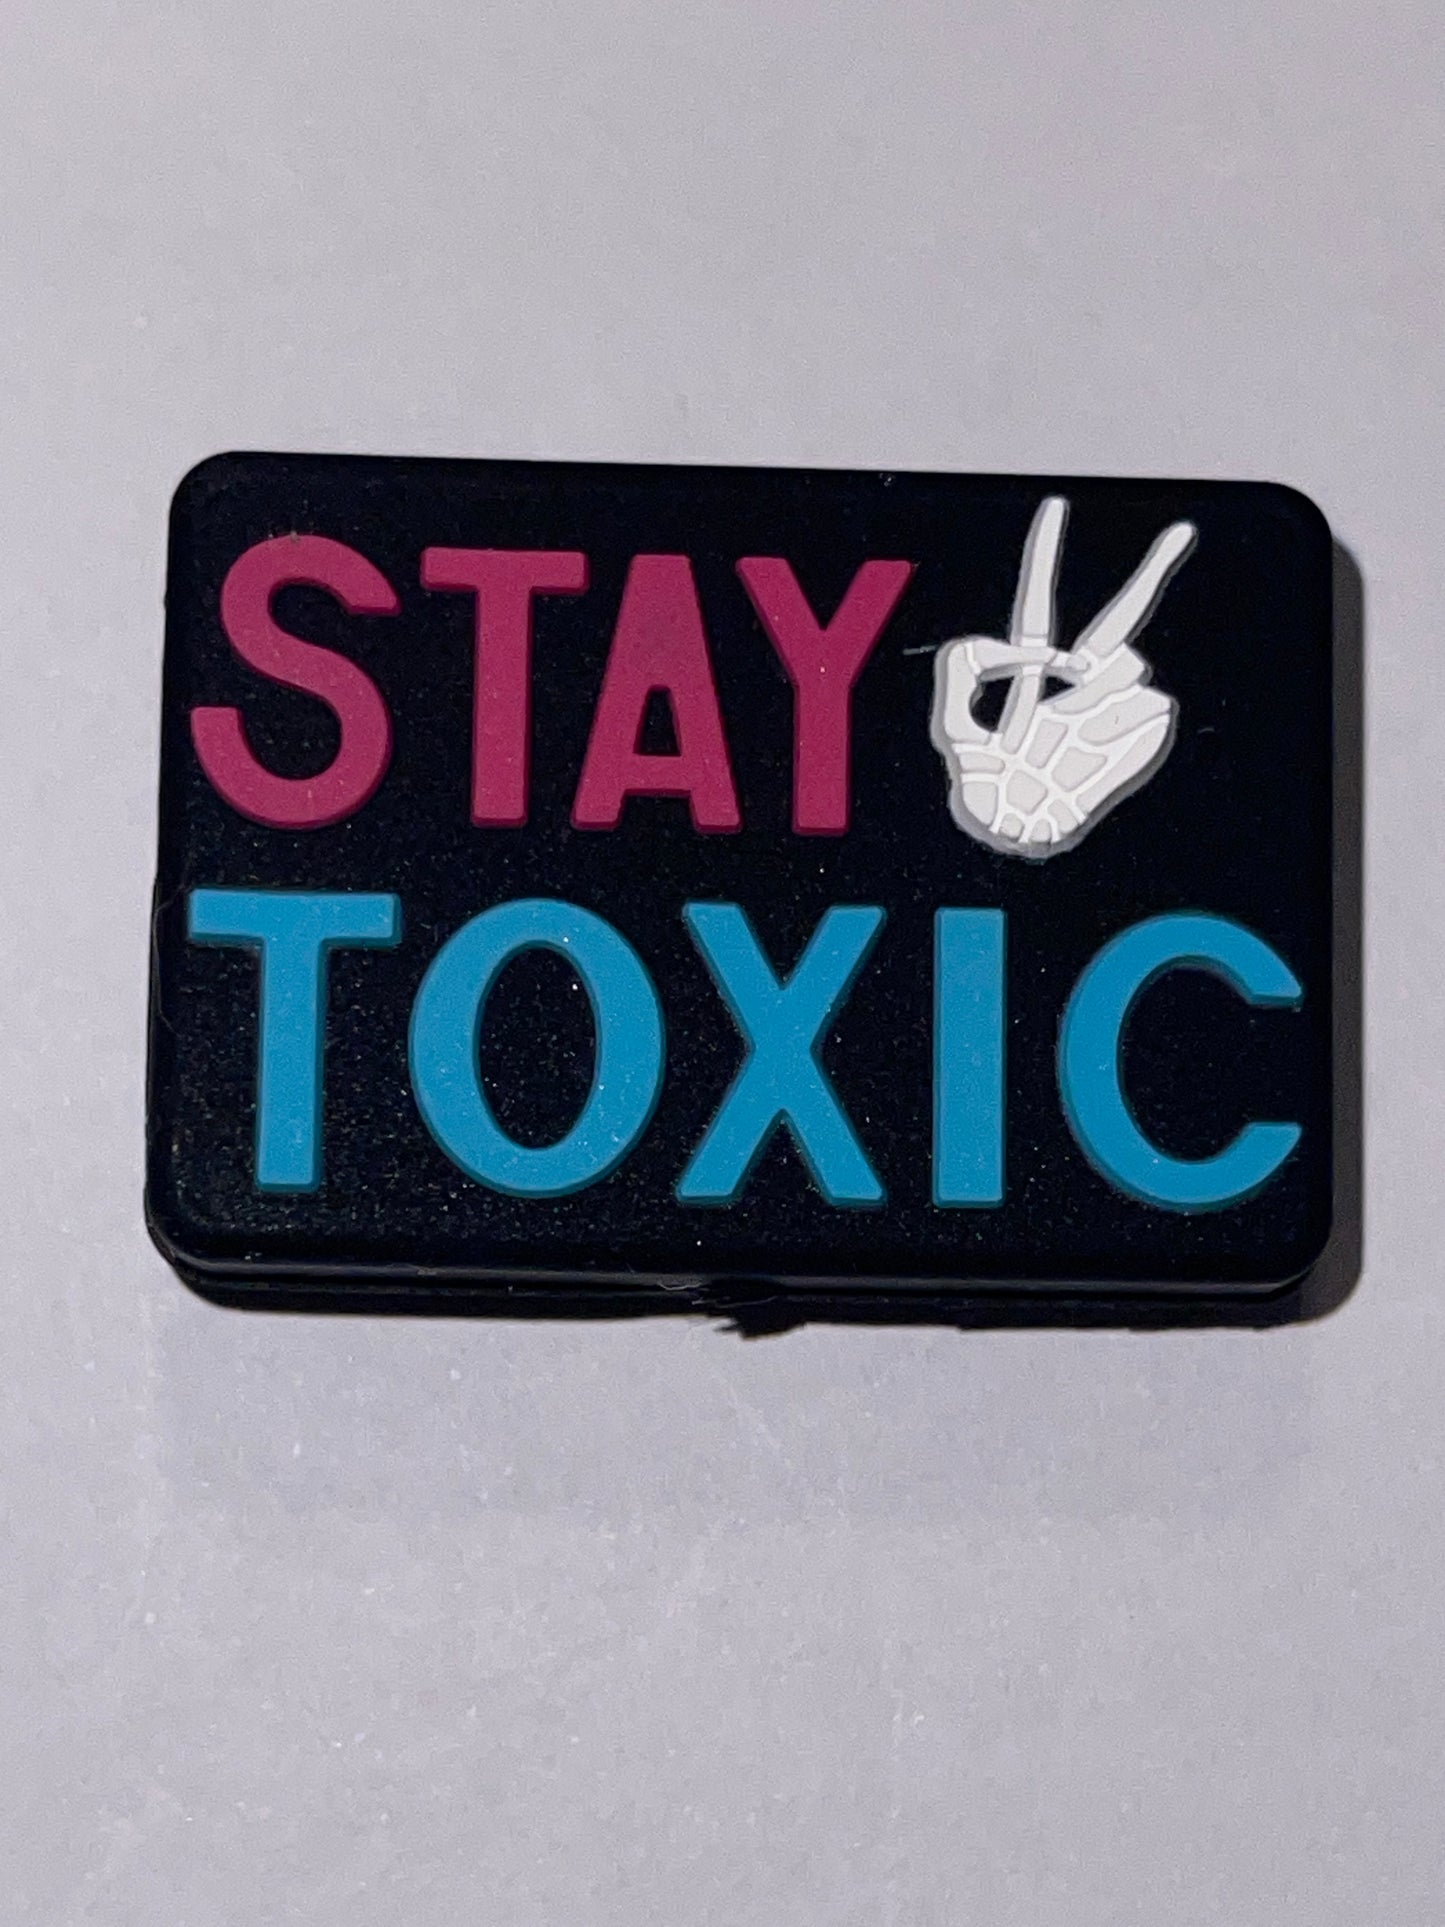 Stay toxic